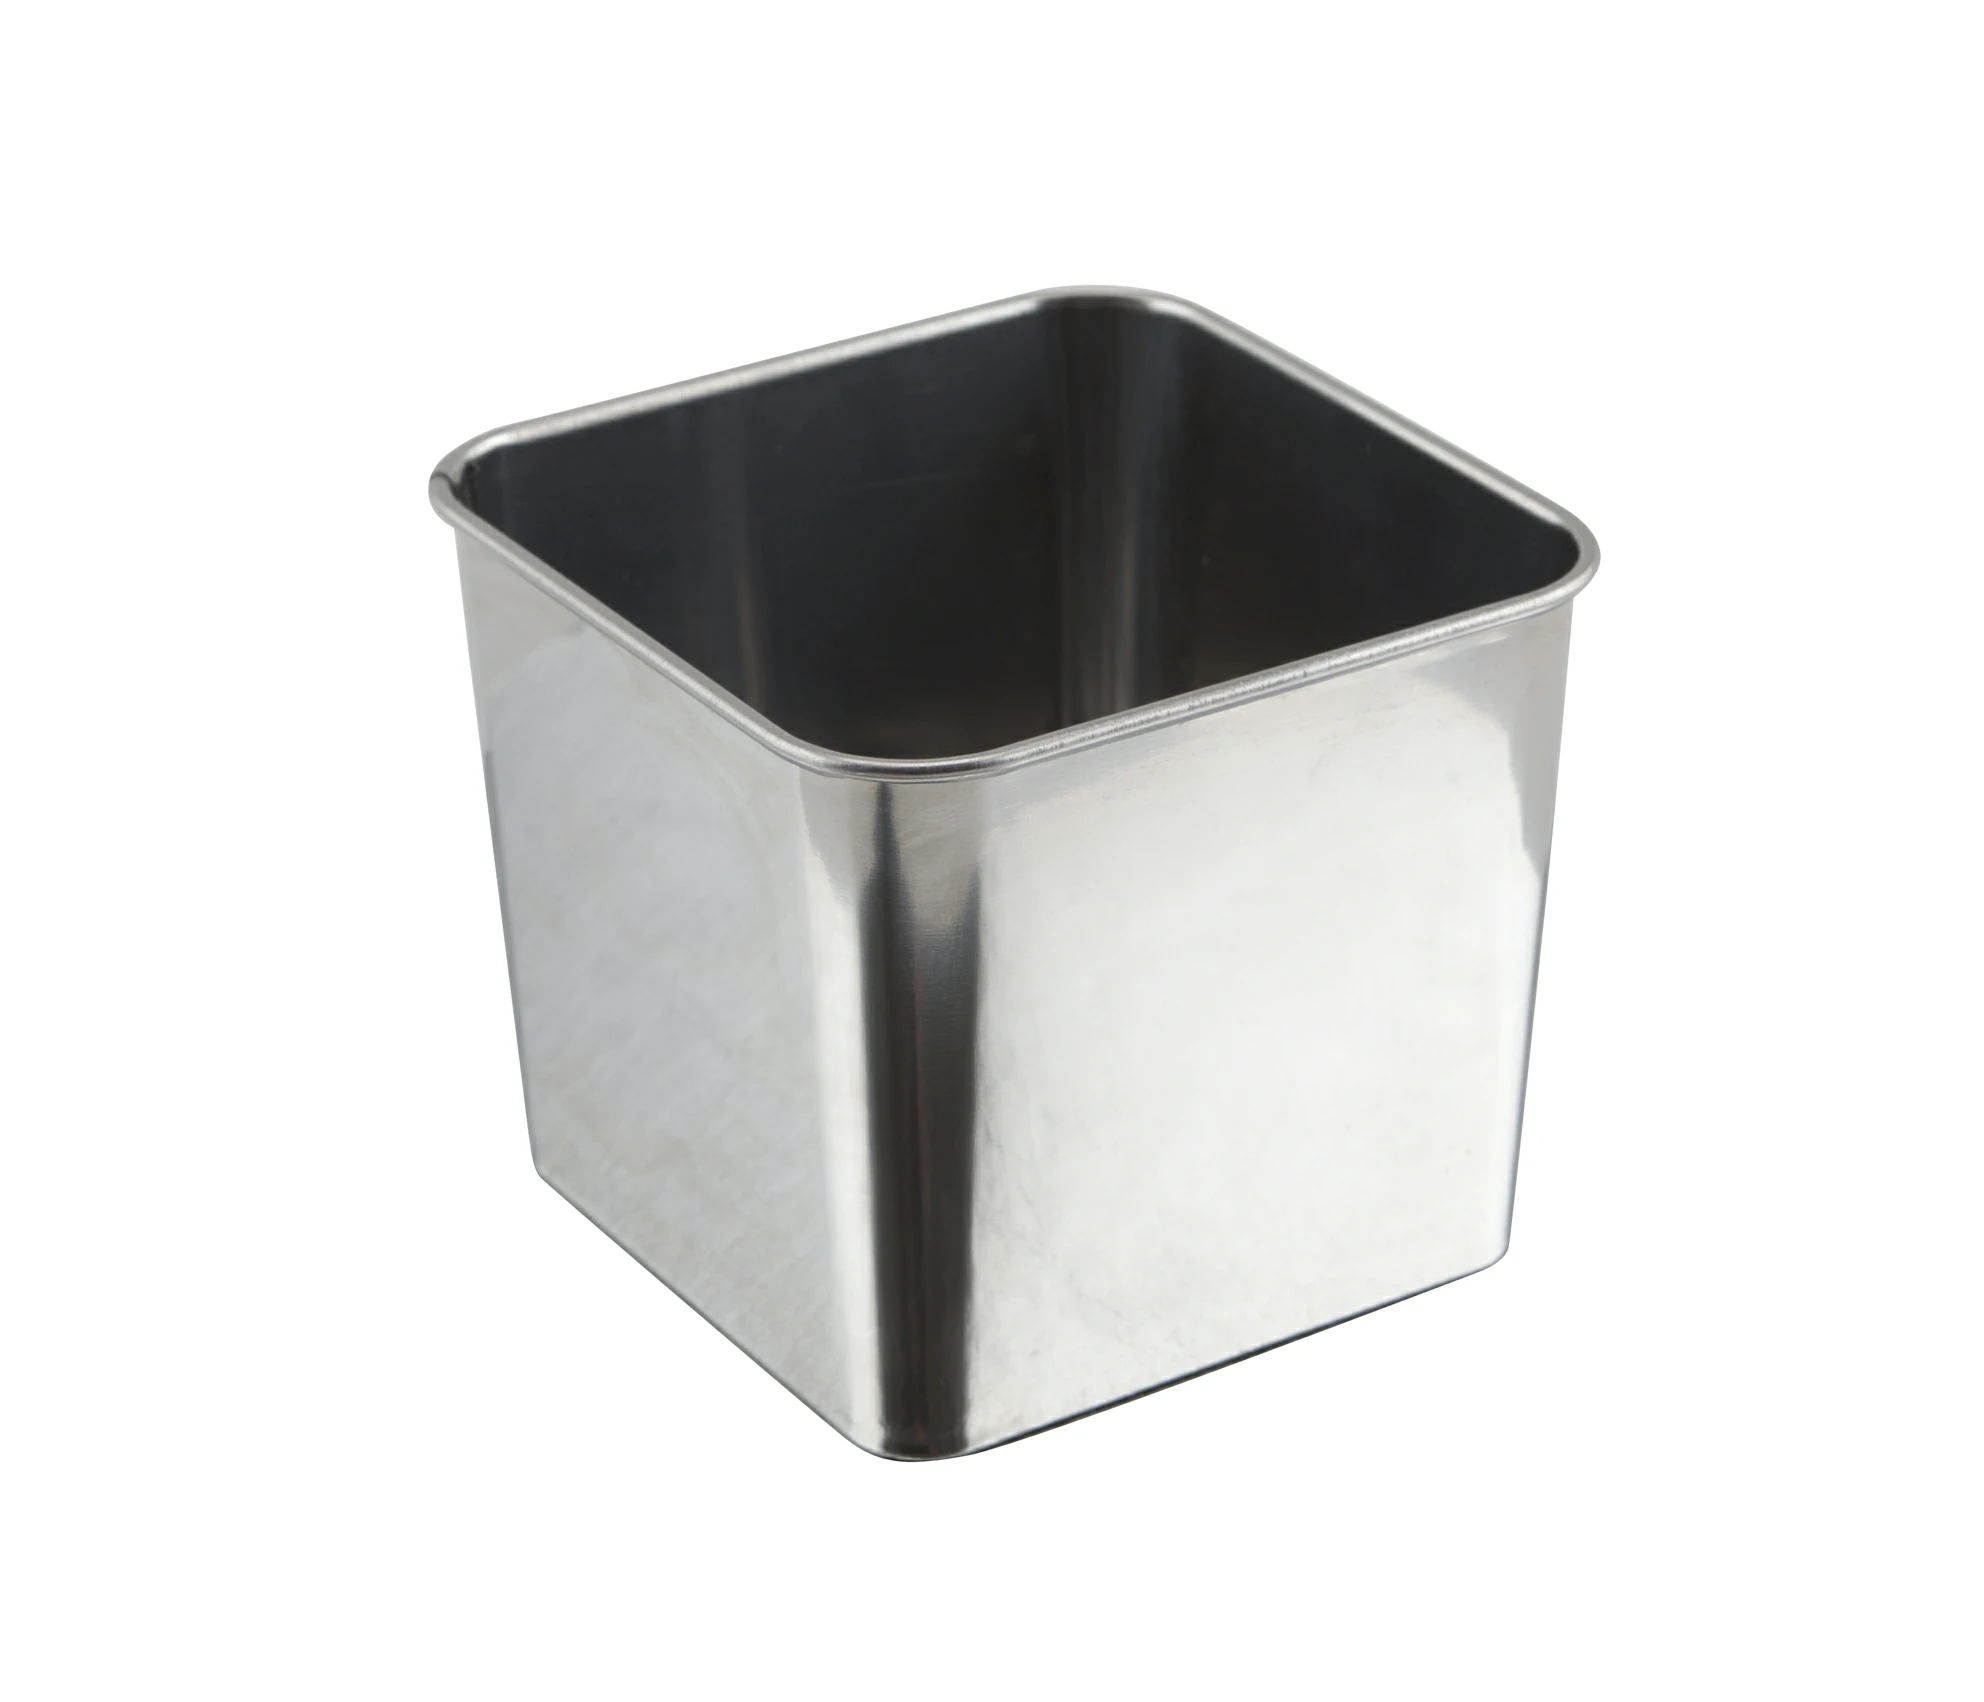 Stainless Steel Square Tub 8 x 8 x 6cm